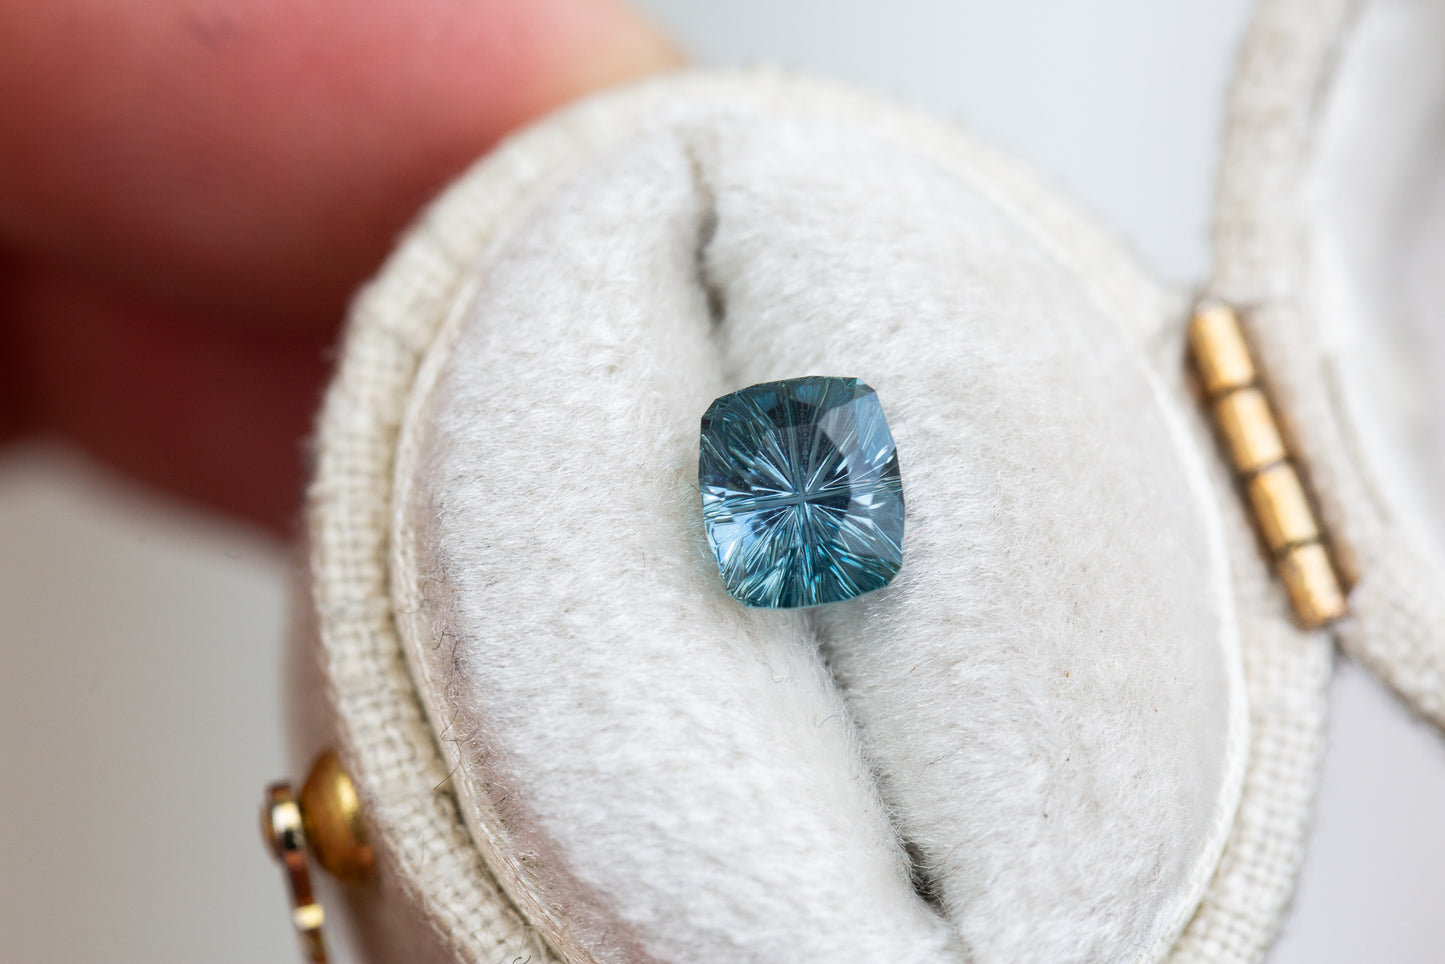 Load image into Gallery viewer, 1.42ct cushion cut teal blue sapphire- Starbrite cut by John Dyer
